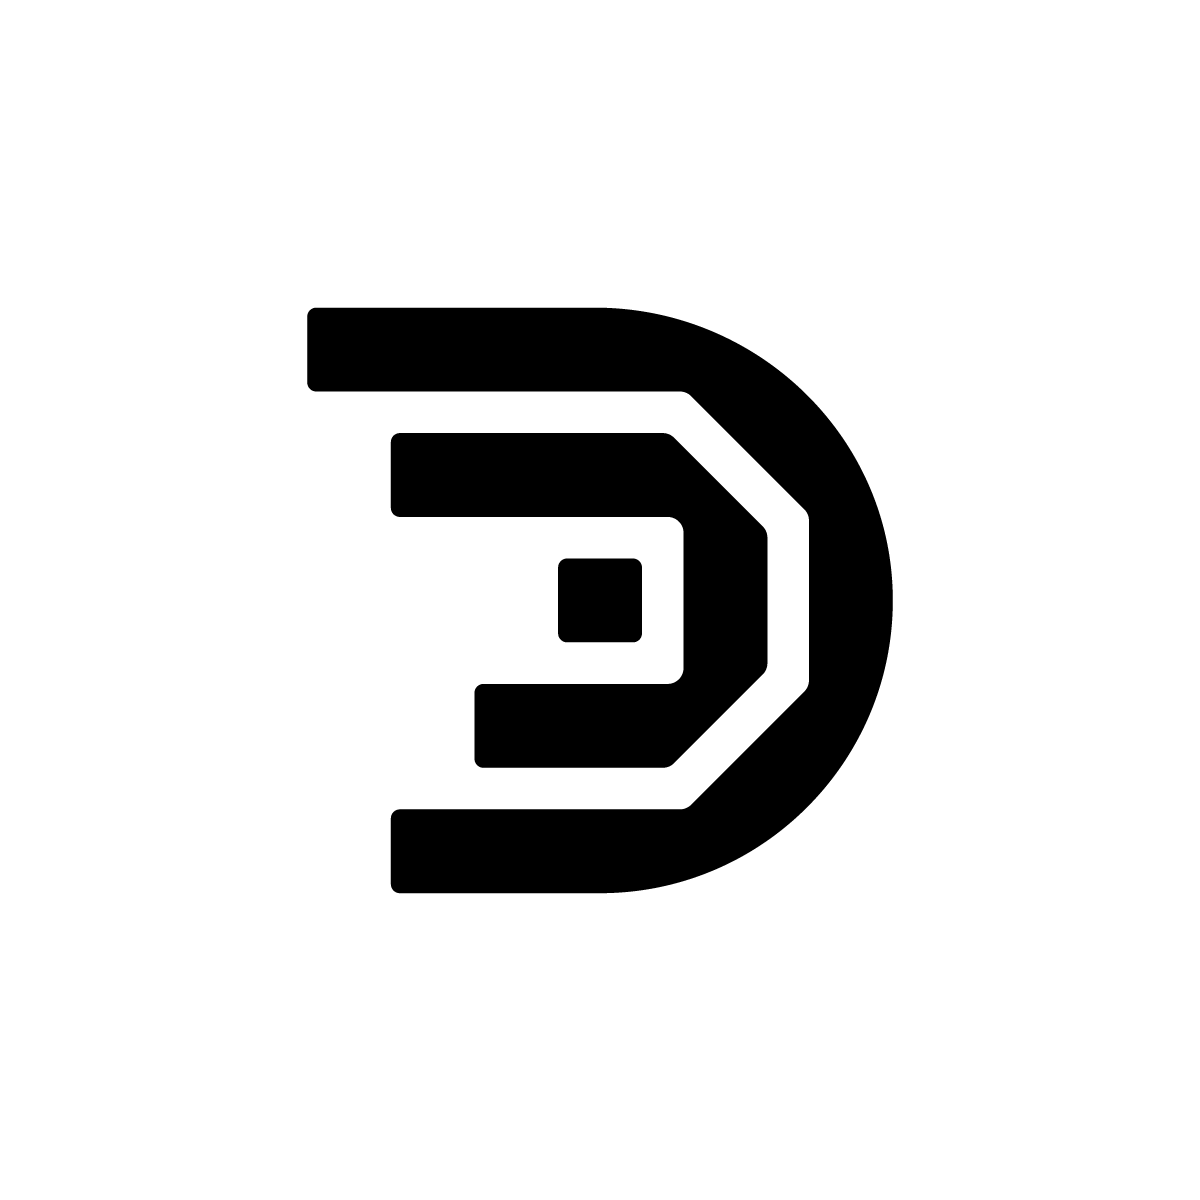 D Layers Logo: Intricate 'D' with layers and square inside, symbolizing depth, versatility, and stability for multifaceted and modern brands.